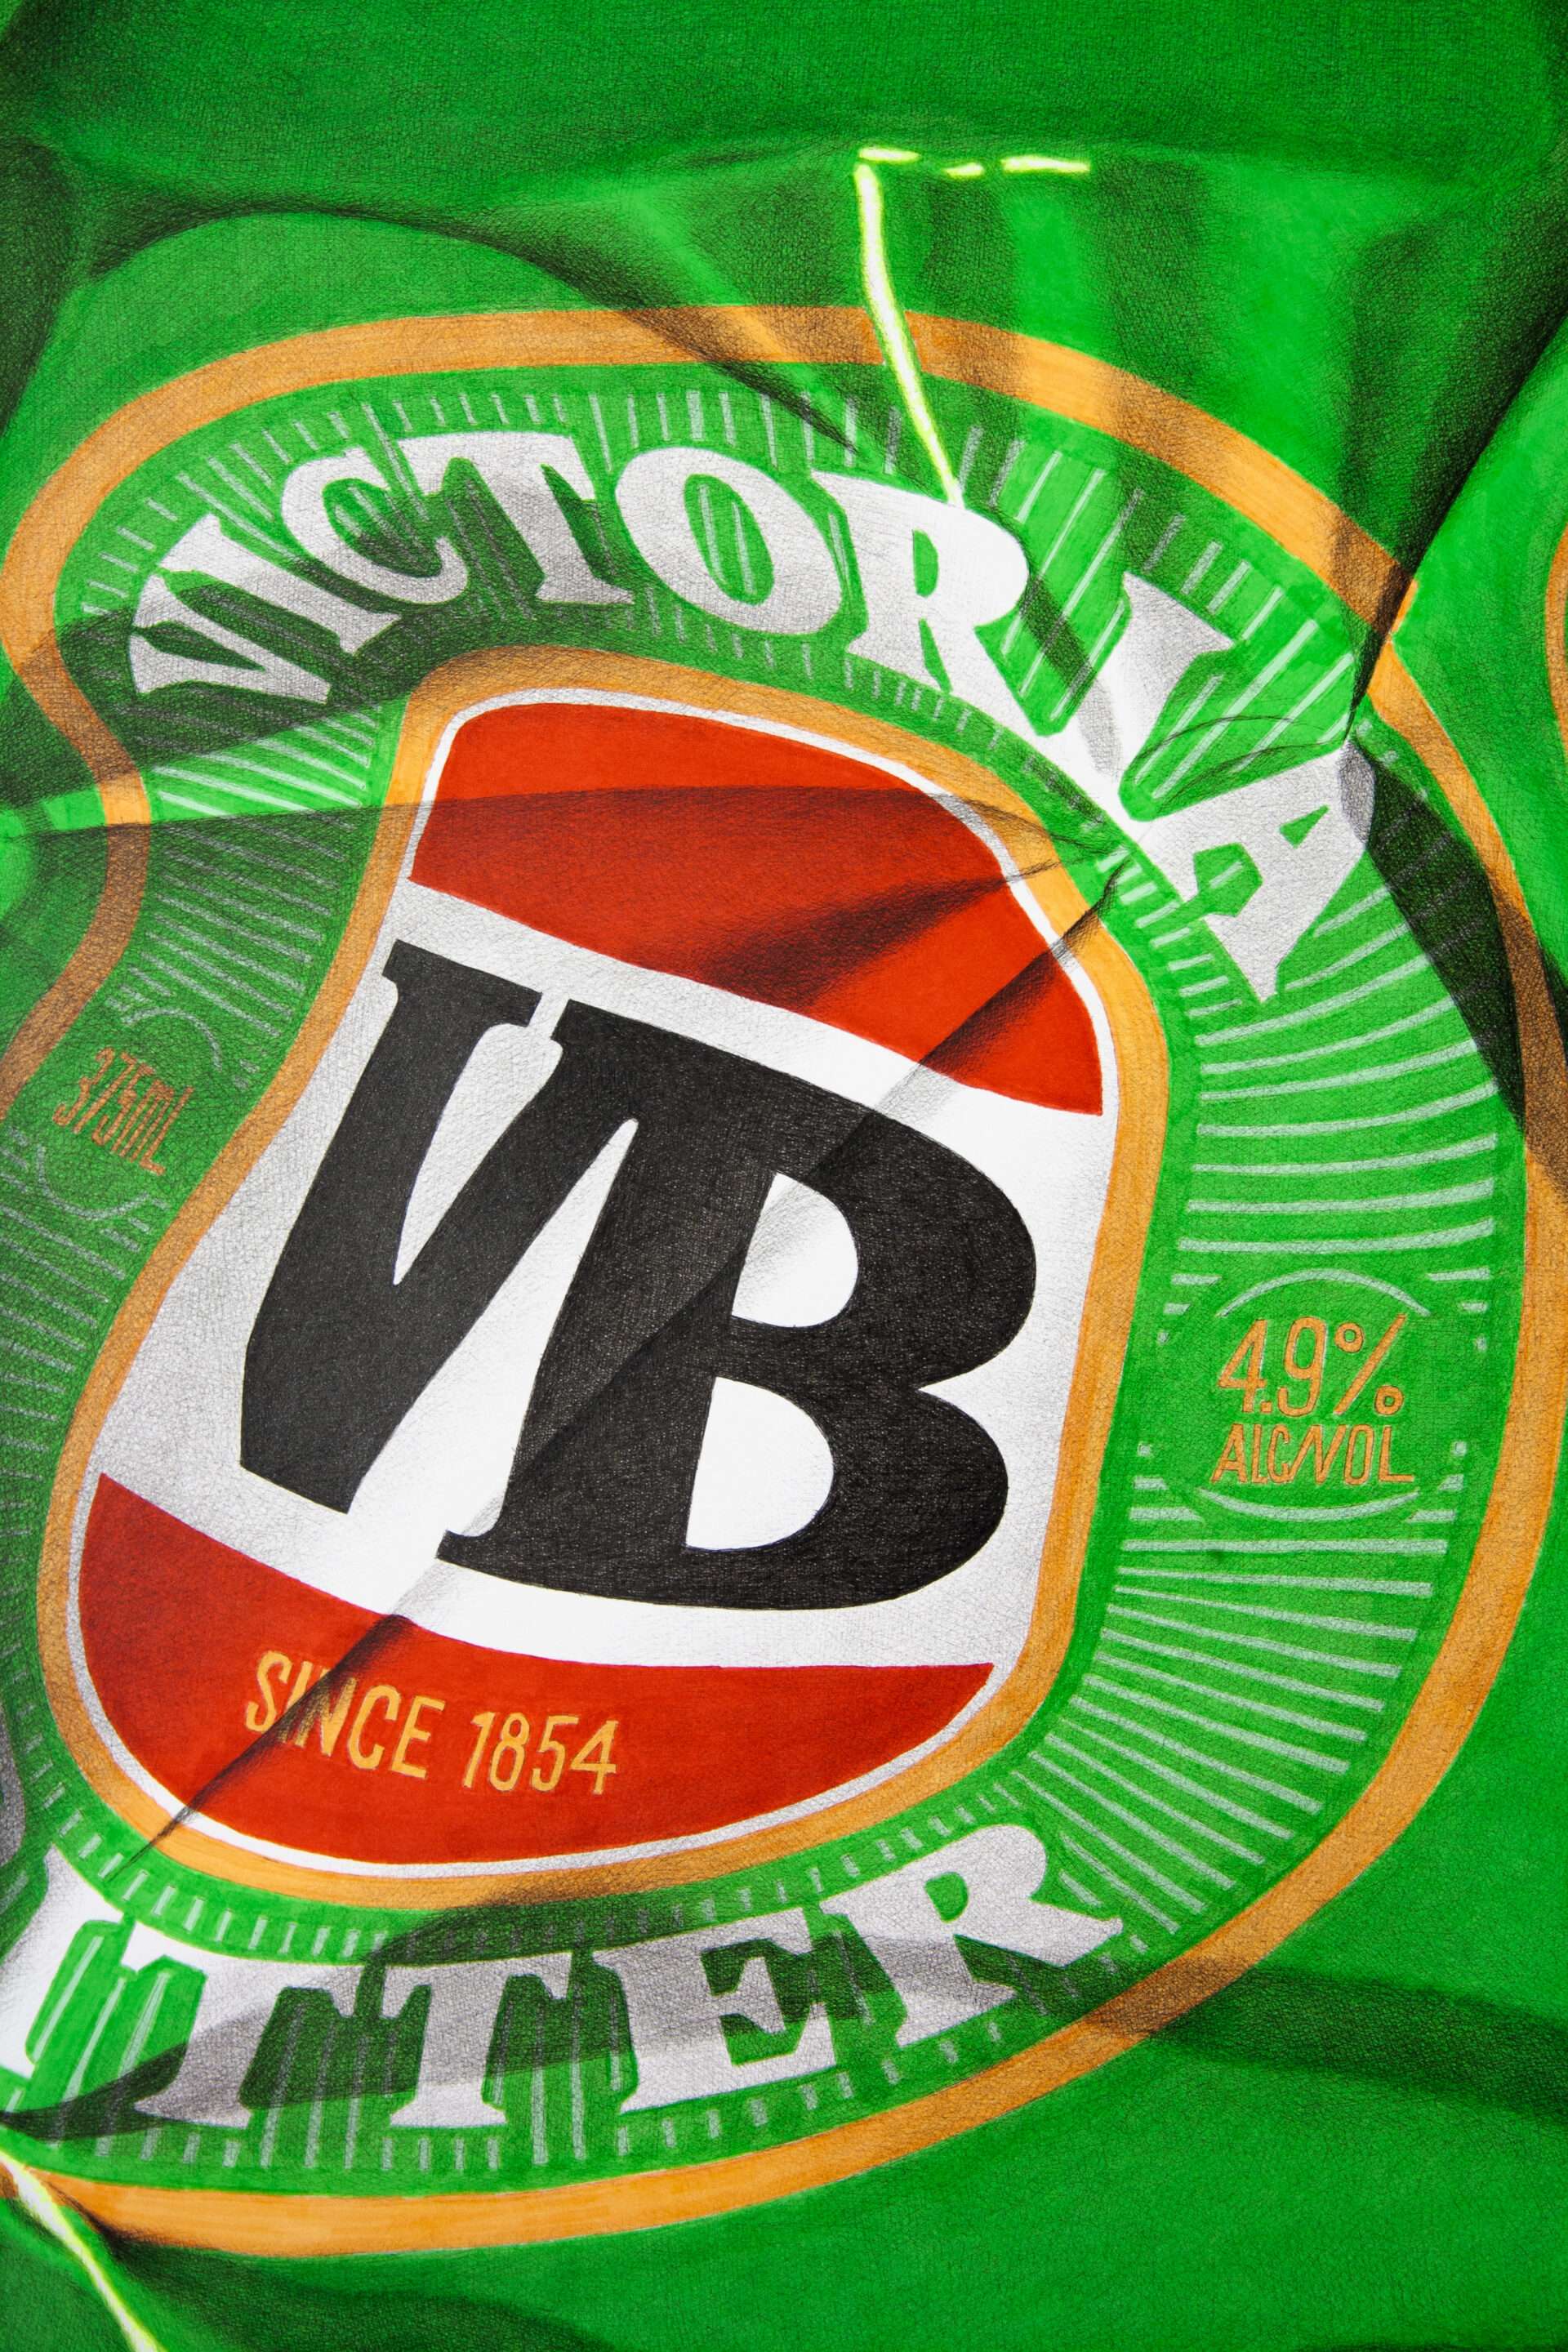 Victoria Bitter beer can hand drawn artwork by Dean Spinks